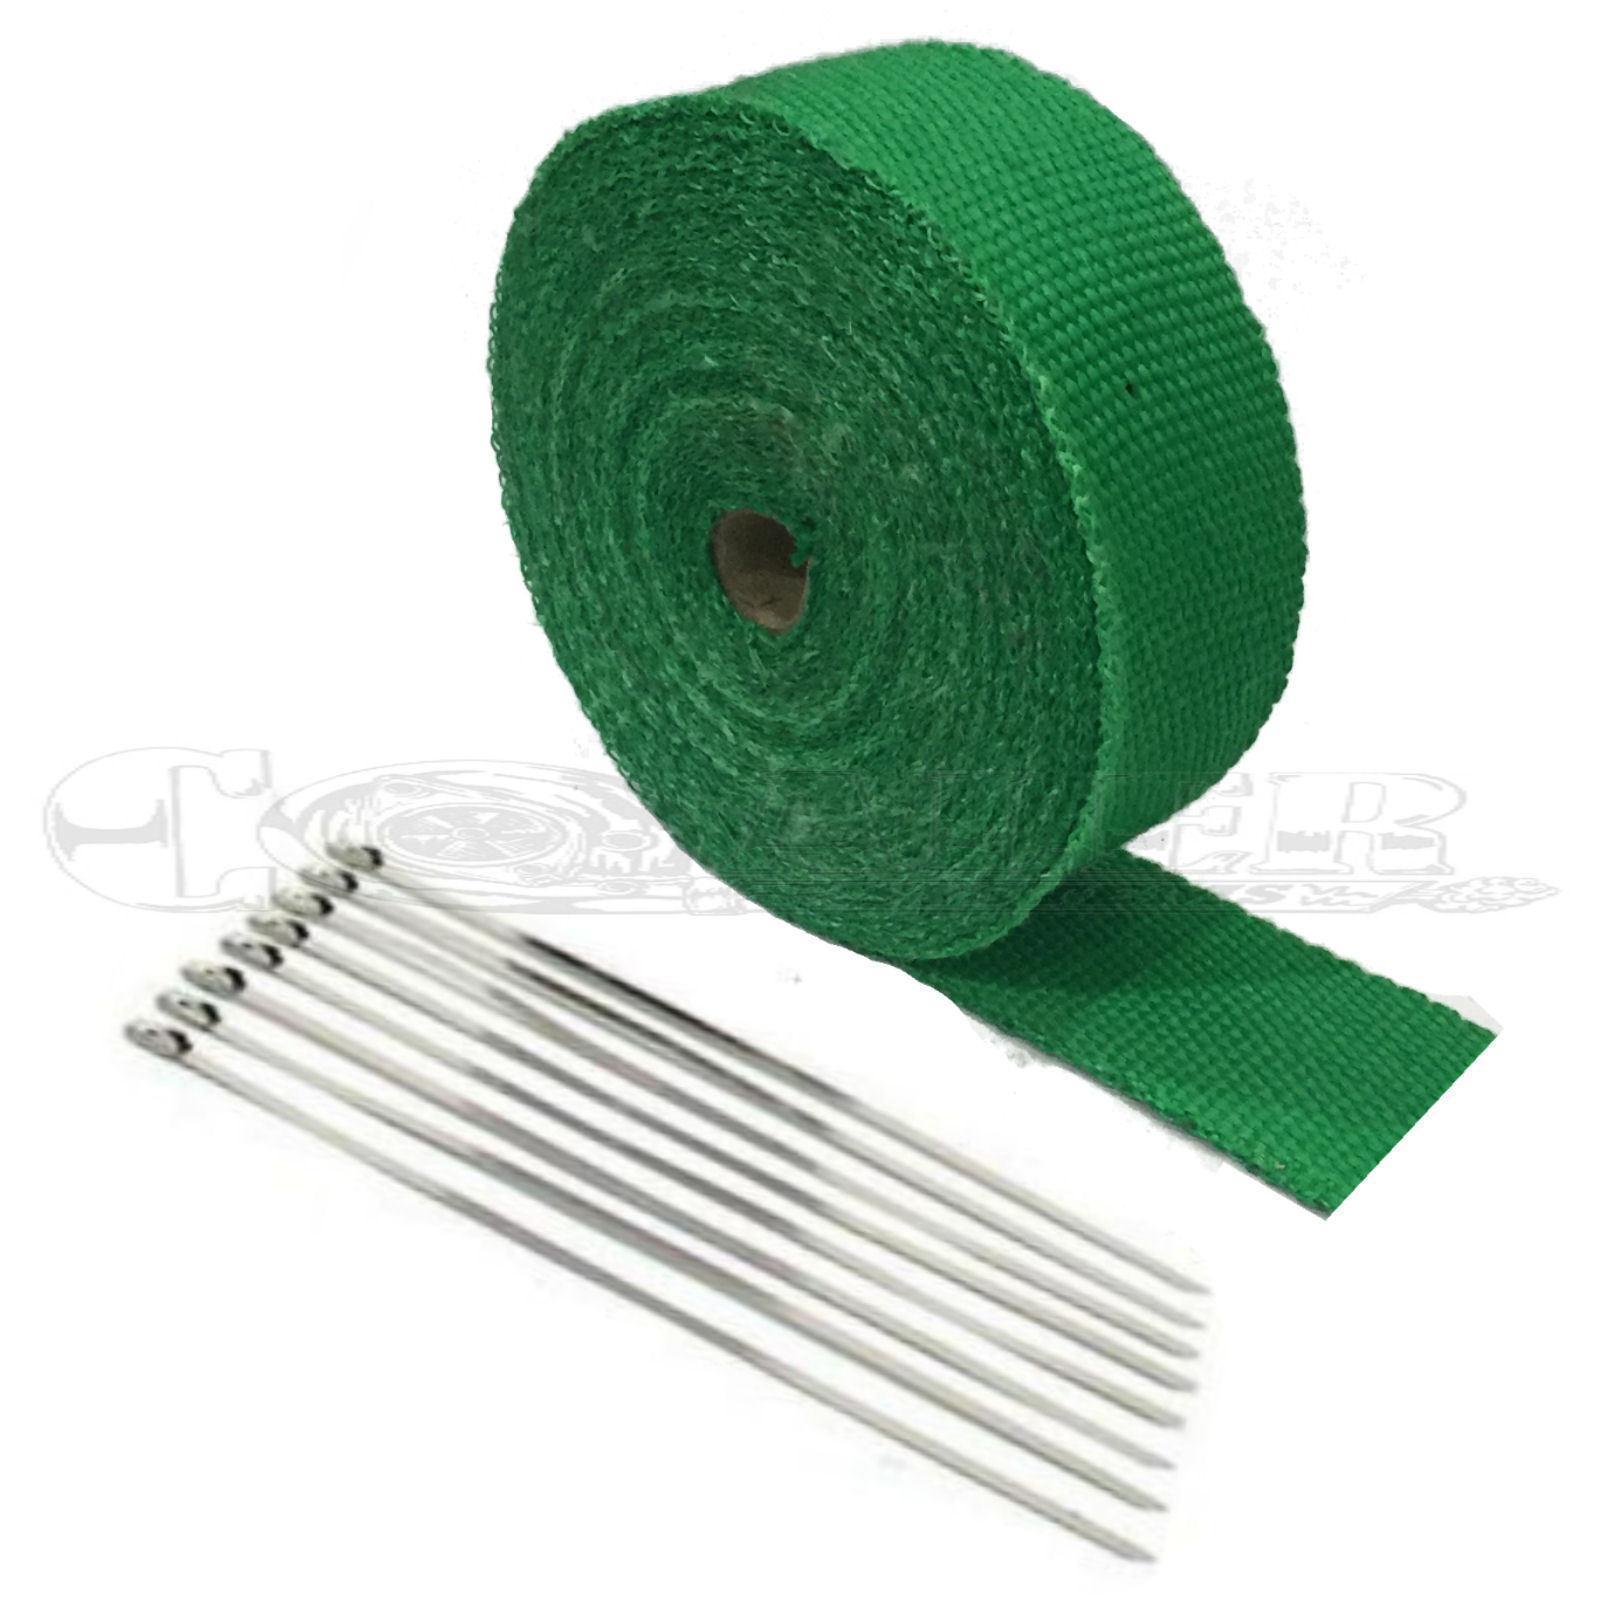 Harley 2" x 50' Motorcycle Protection Header Exhaust Heat Wrap – Green Sale